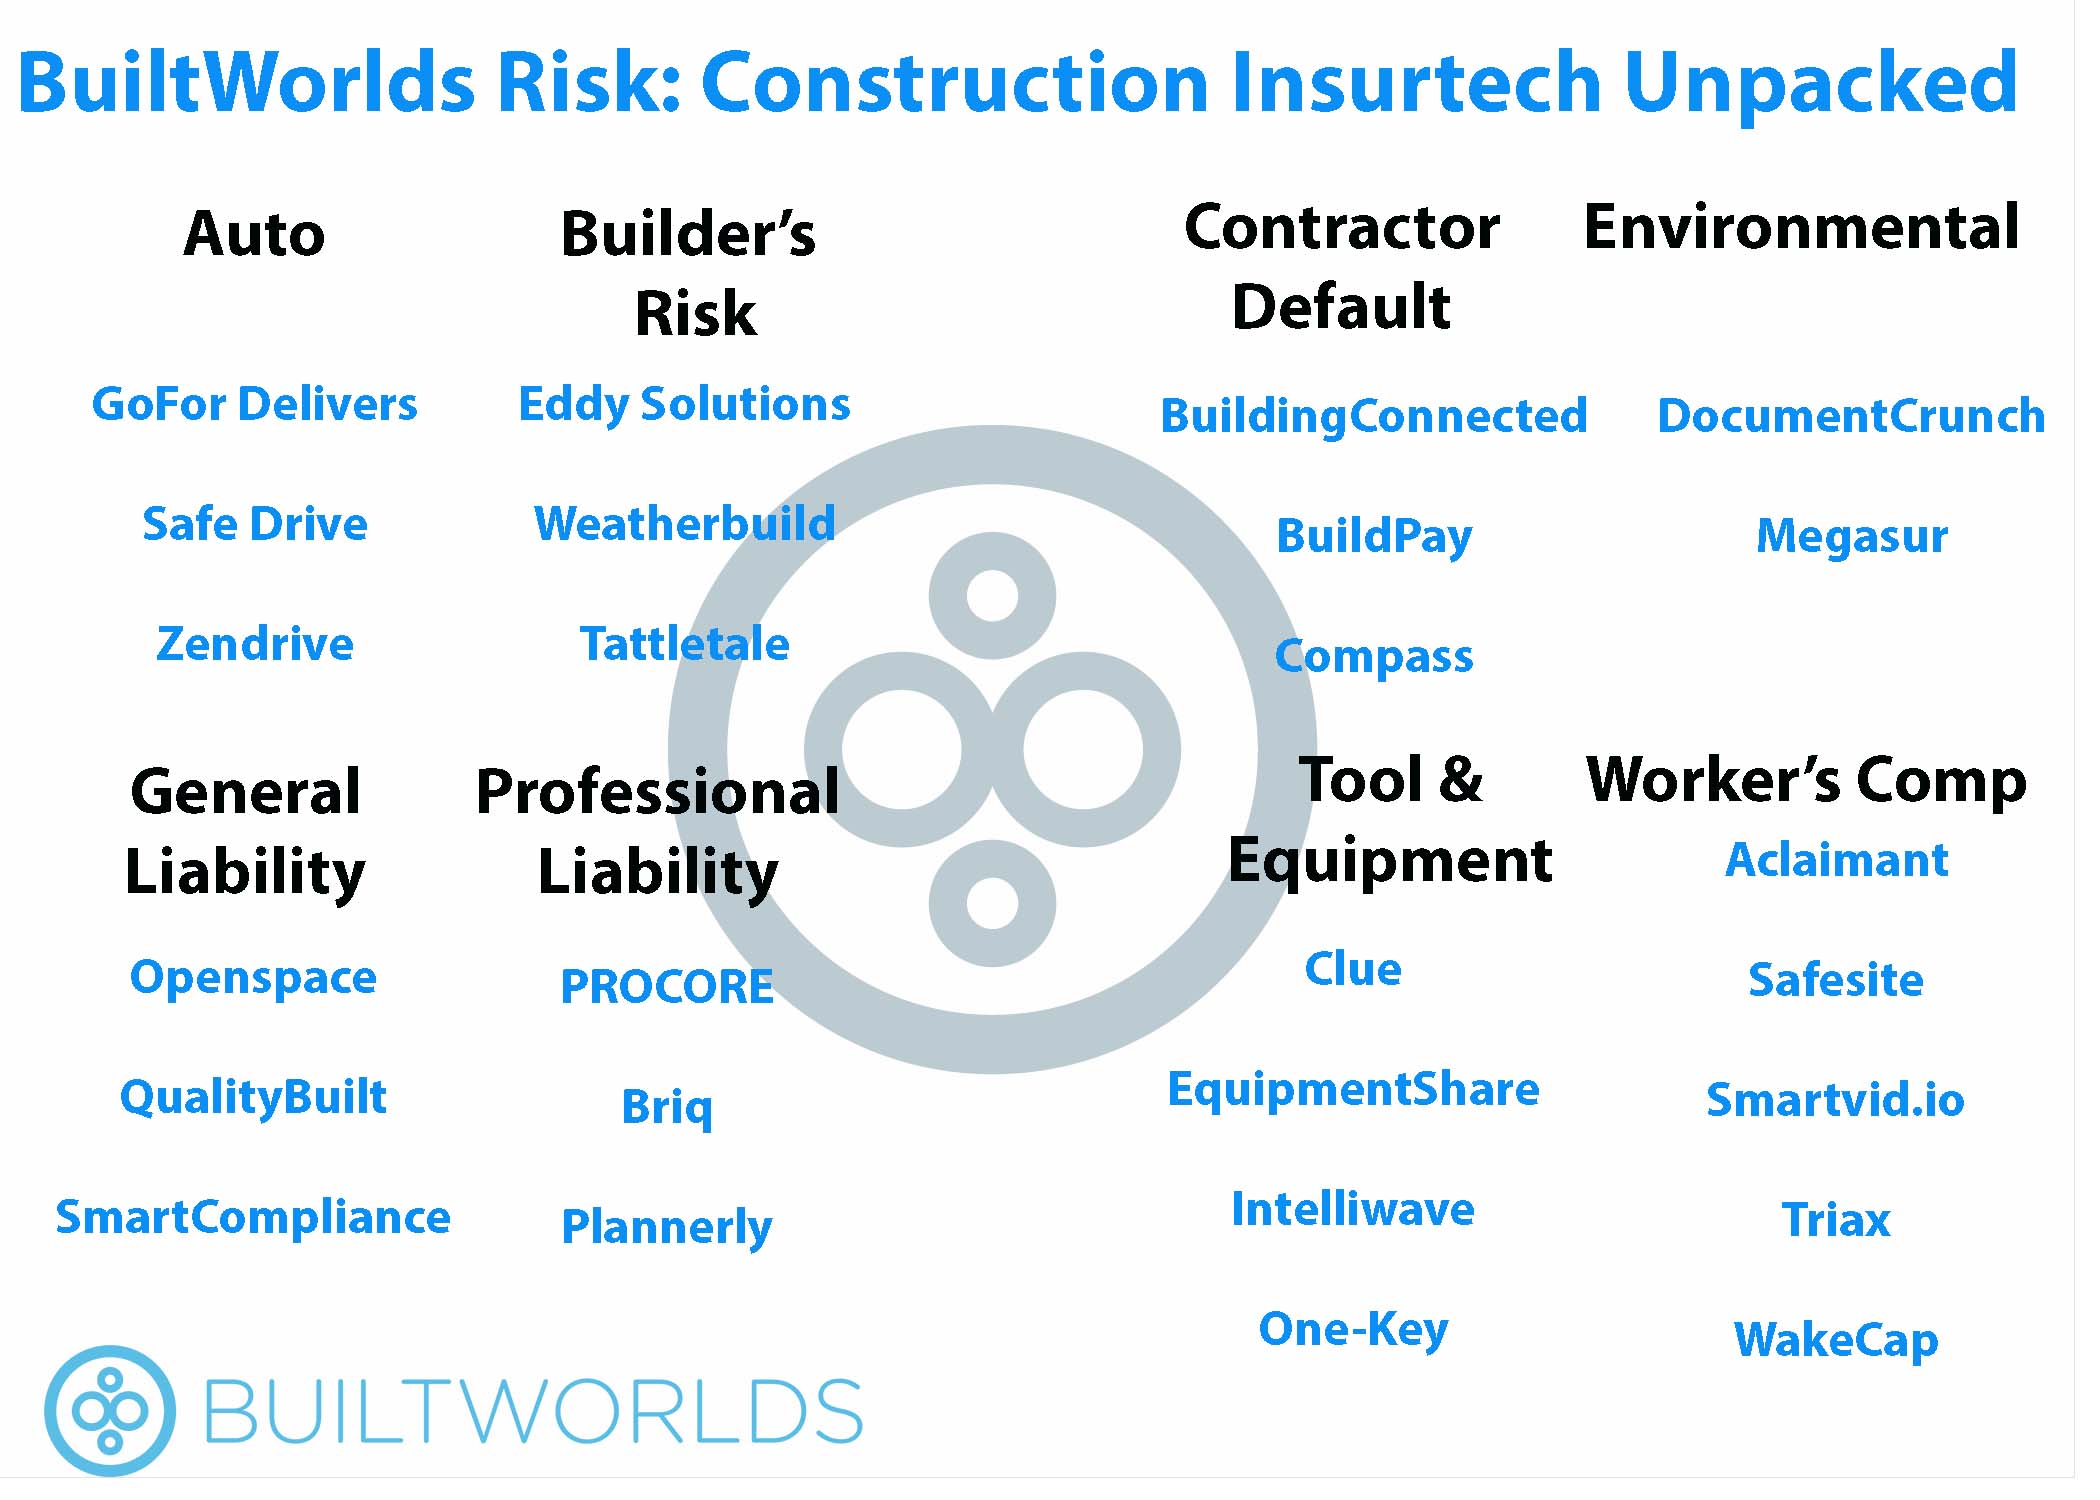 Eight Lines of Construction Insurance Potentially Impacted by the Industry's Emerging Technology Solutions.